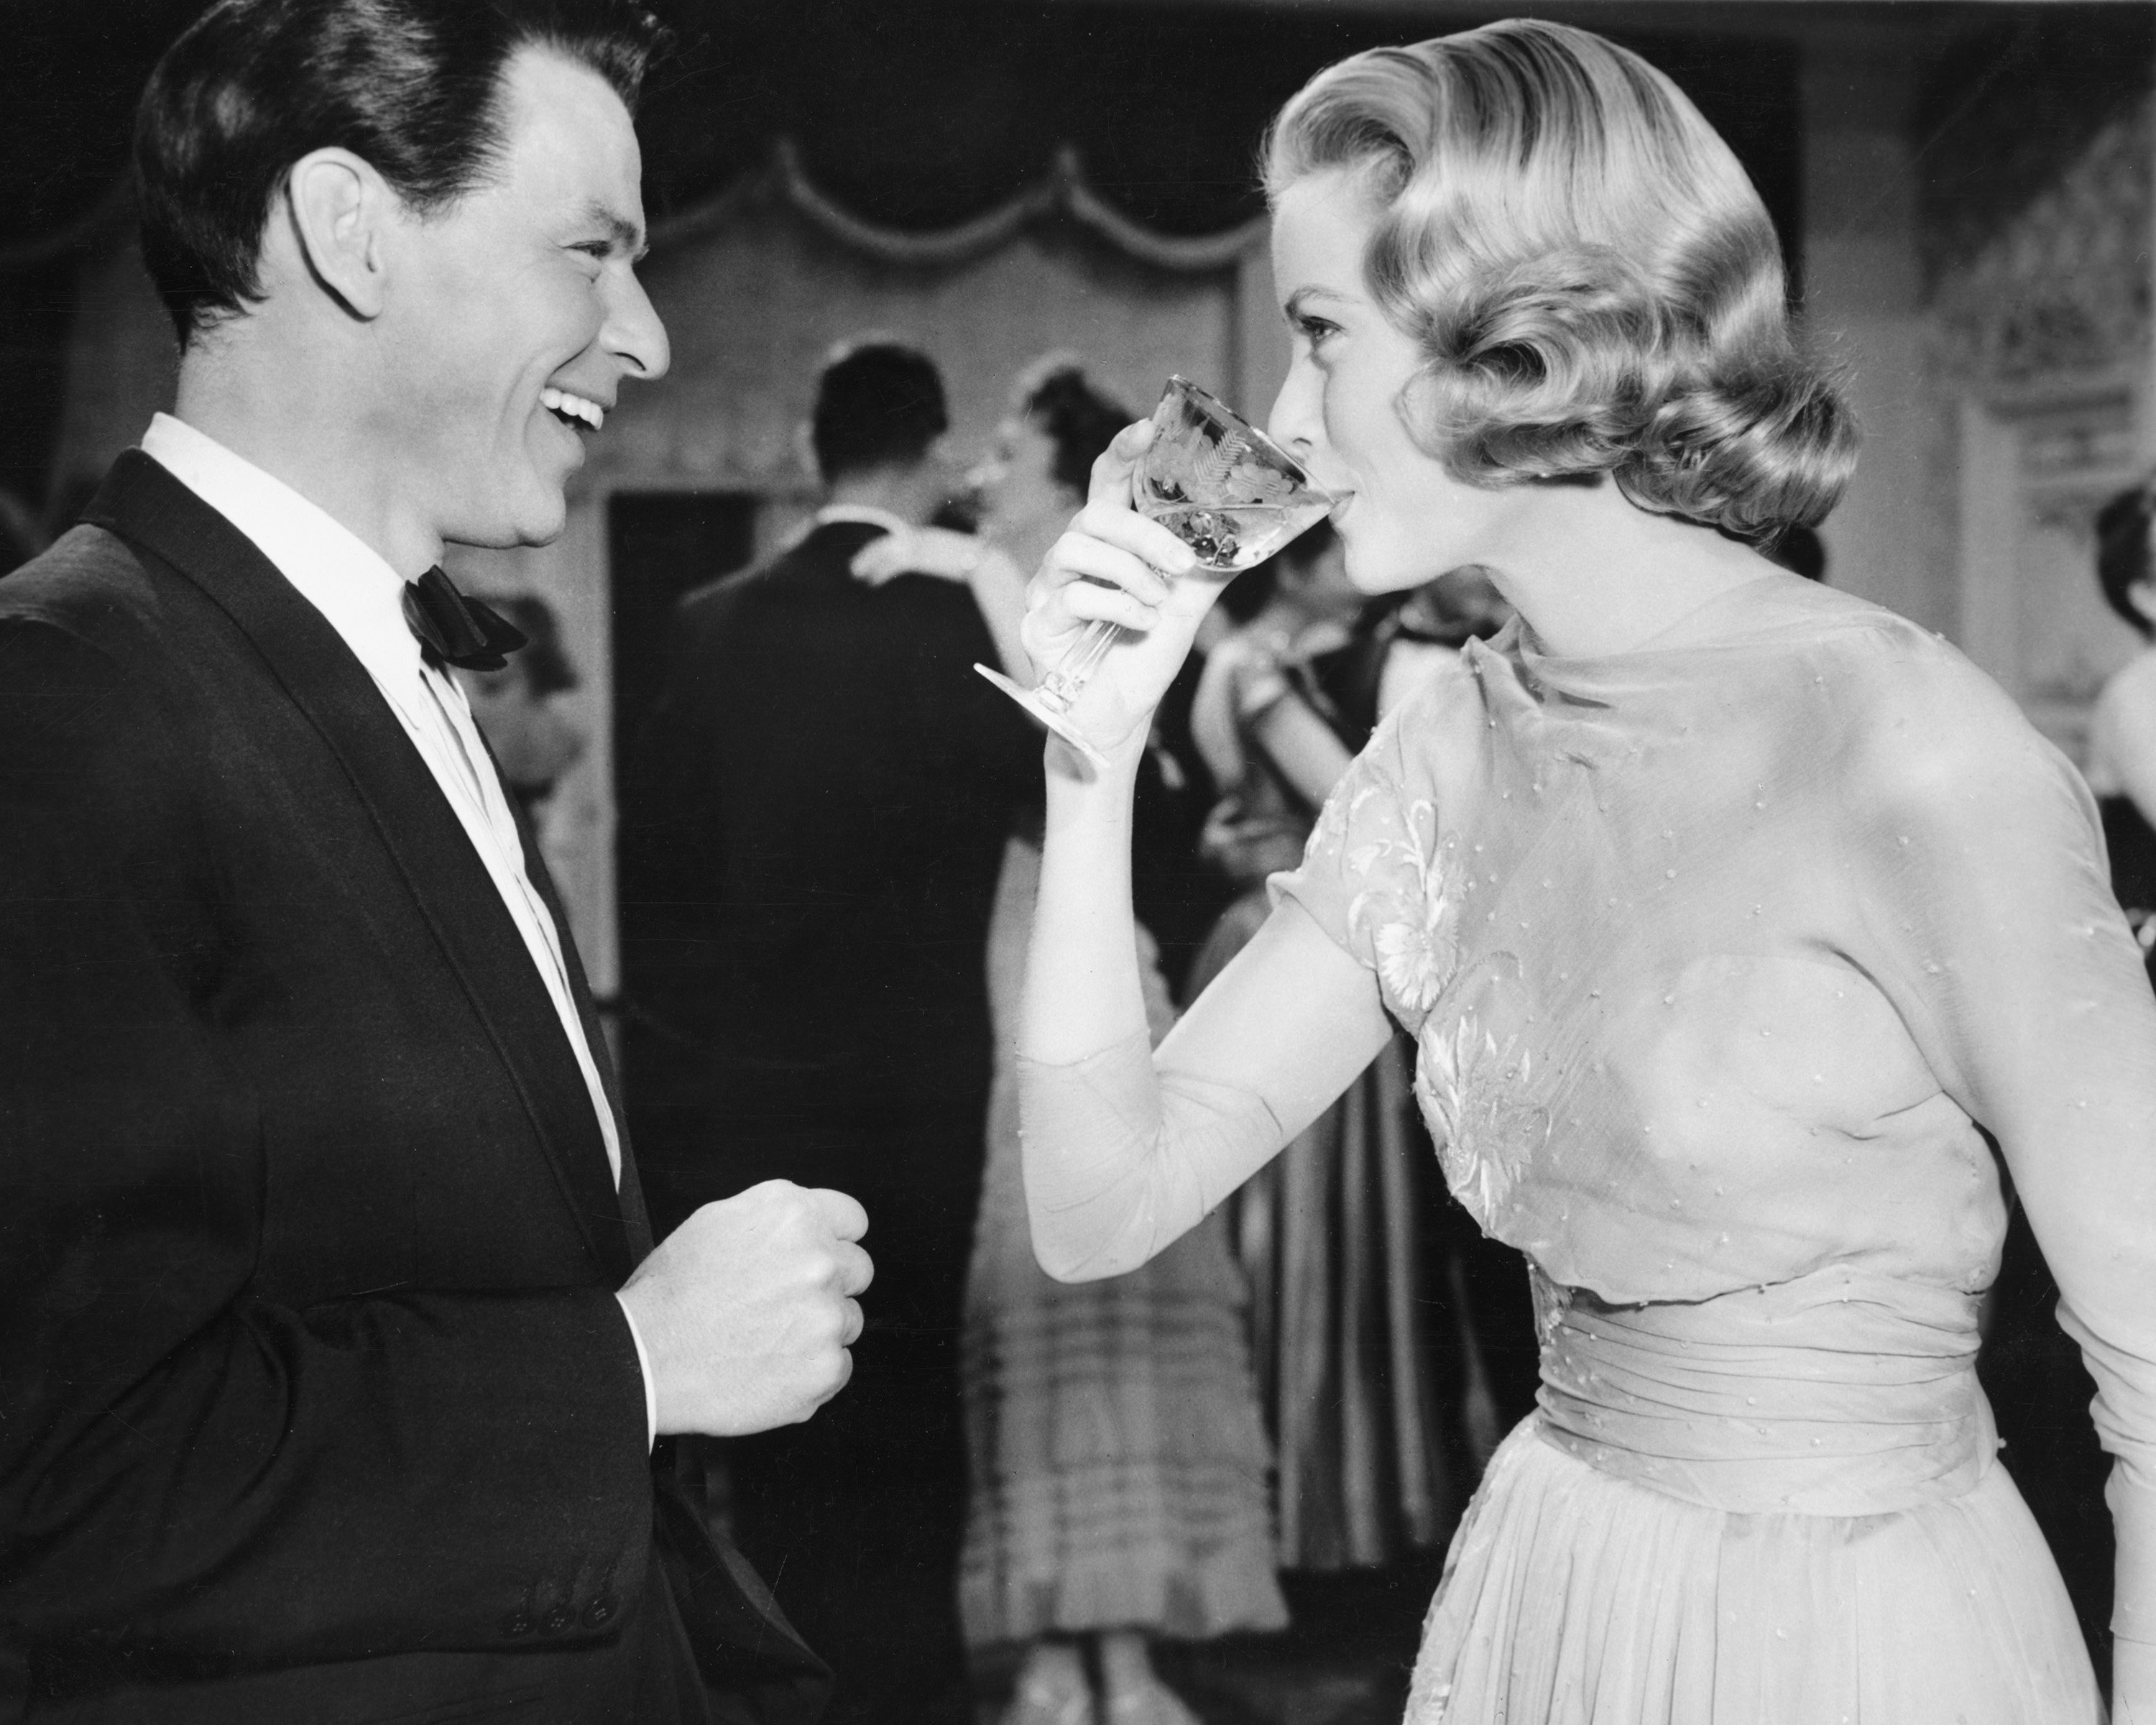 Frank Sinatra wears a tuxedo and smiles at Grace Kelly, who drinks from a glass.